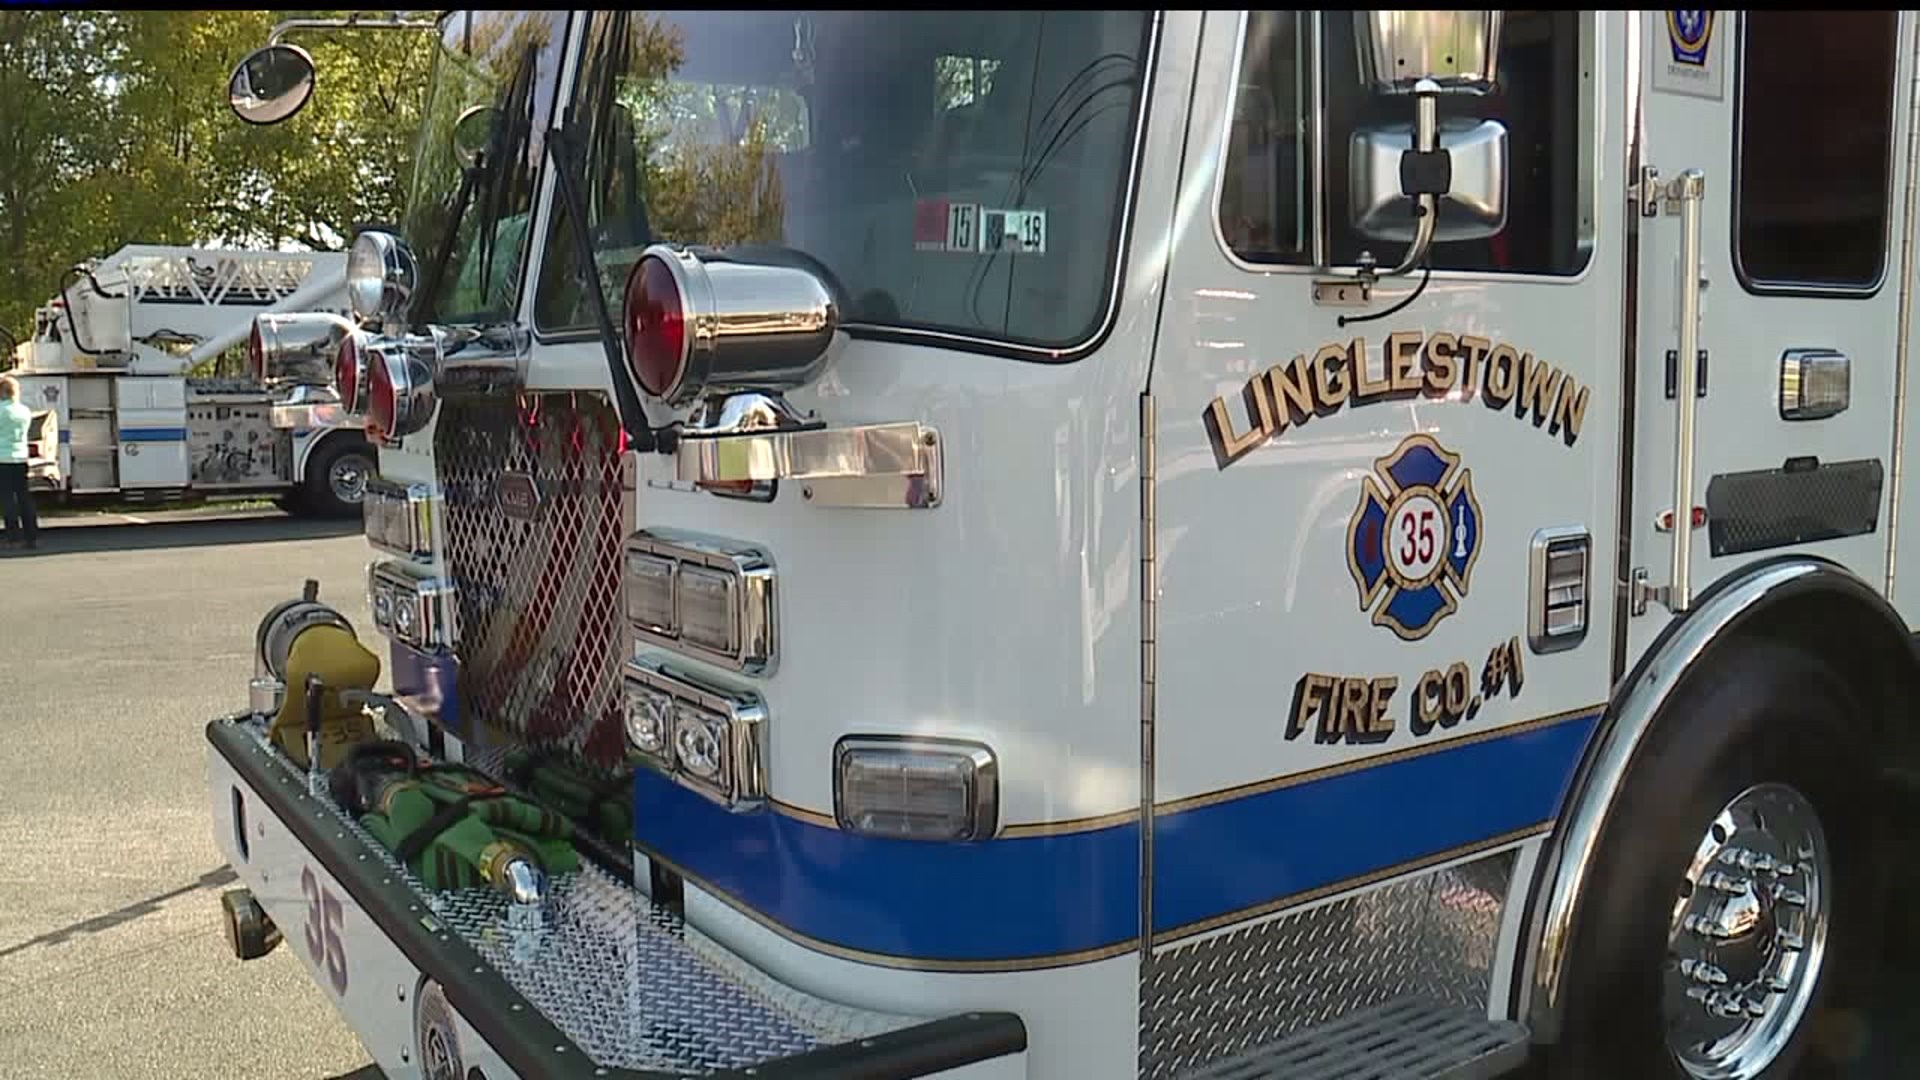 Dedication ceremony held for Linglestown`s new fire truck